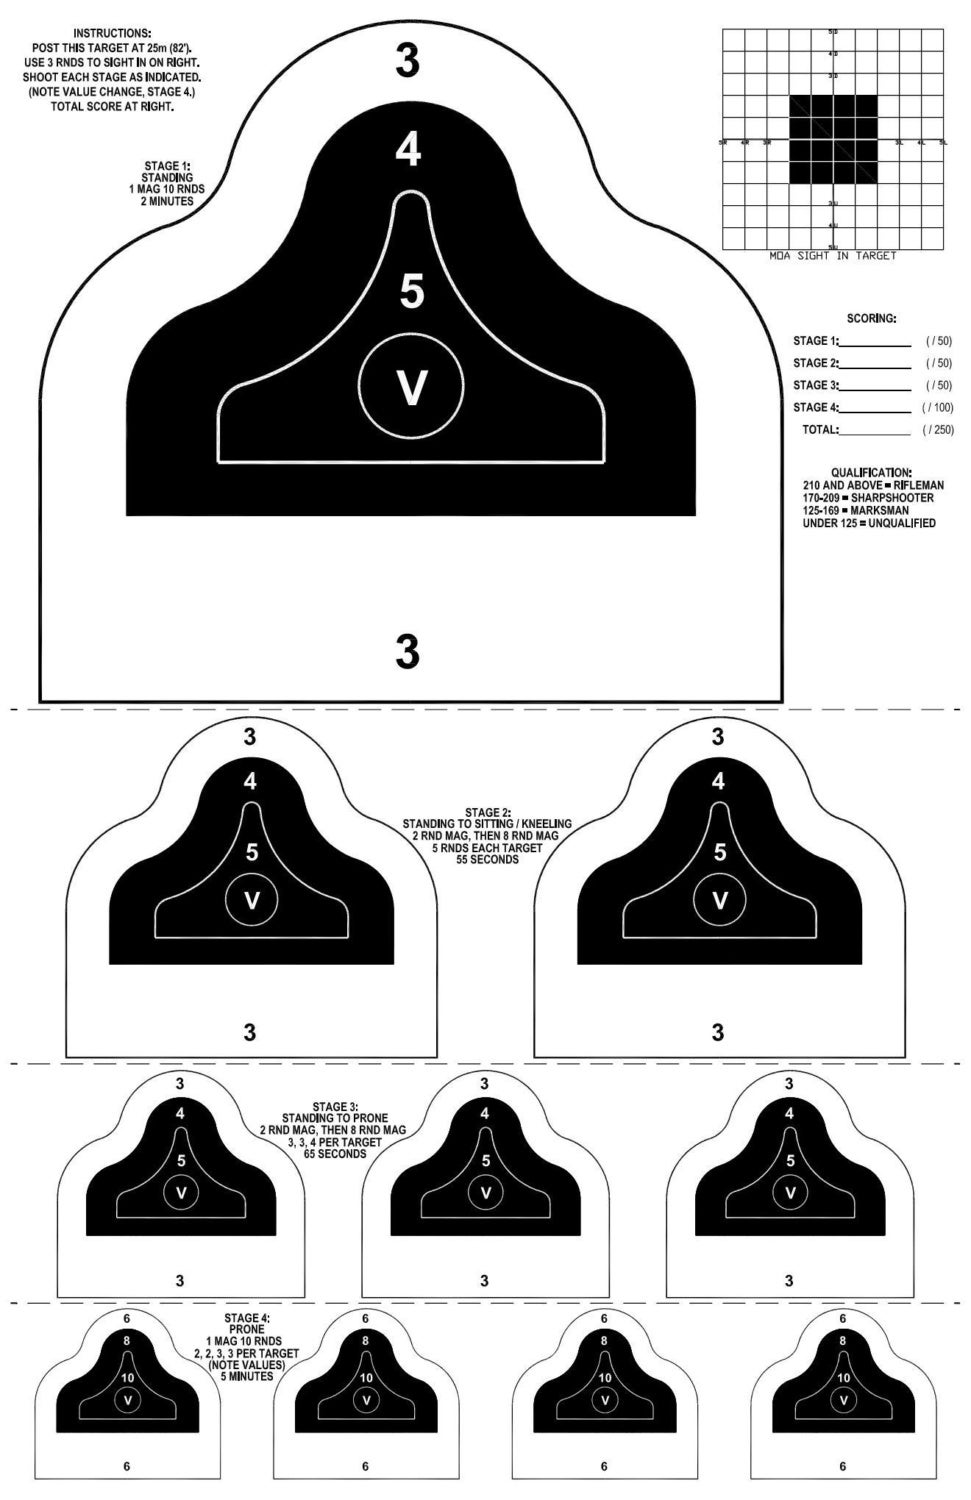 The Rimfire Report: Project Appleseed - Affordable Marksmanship